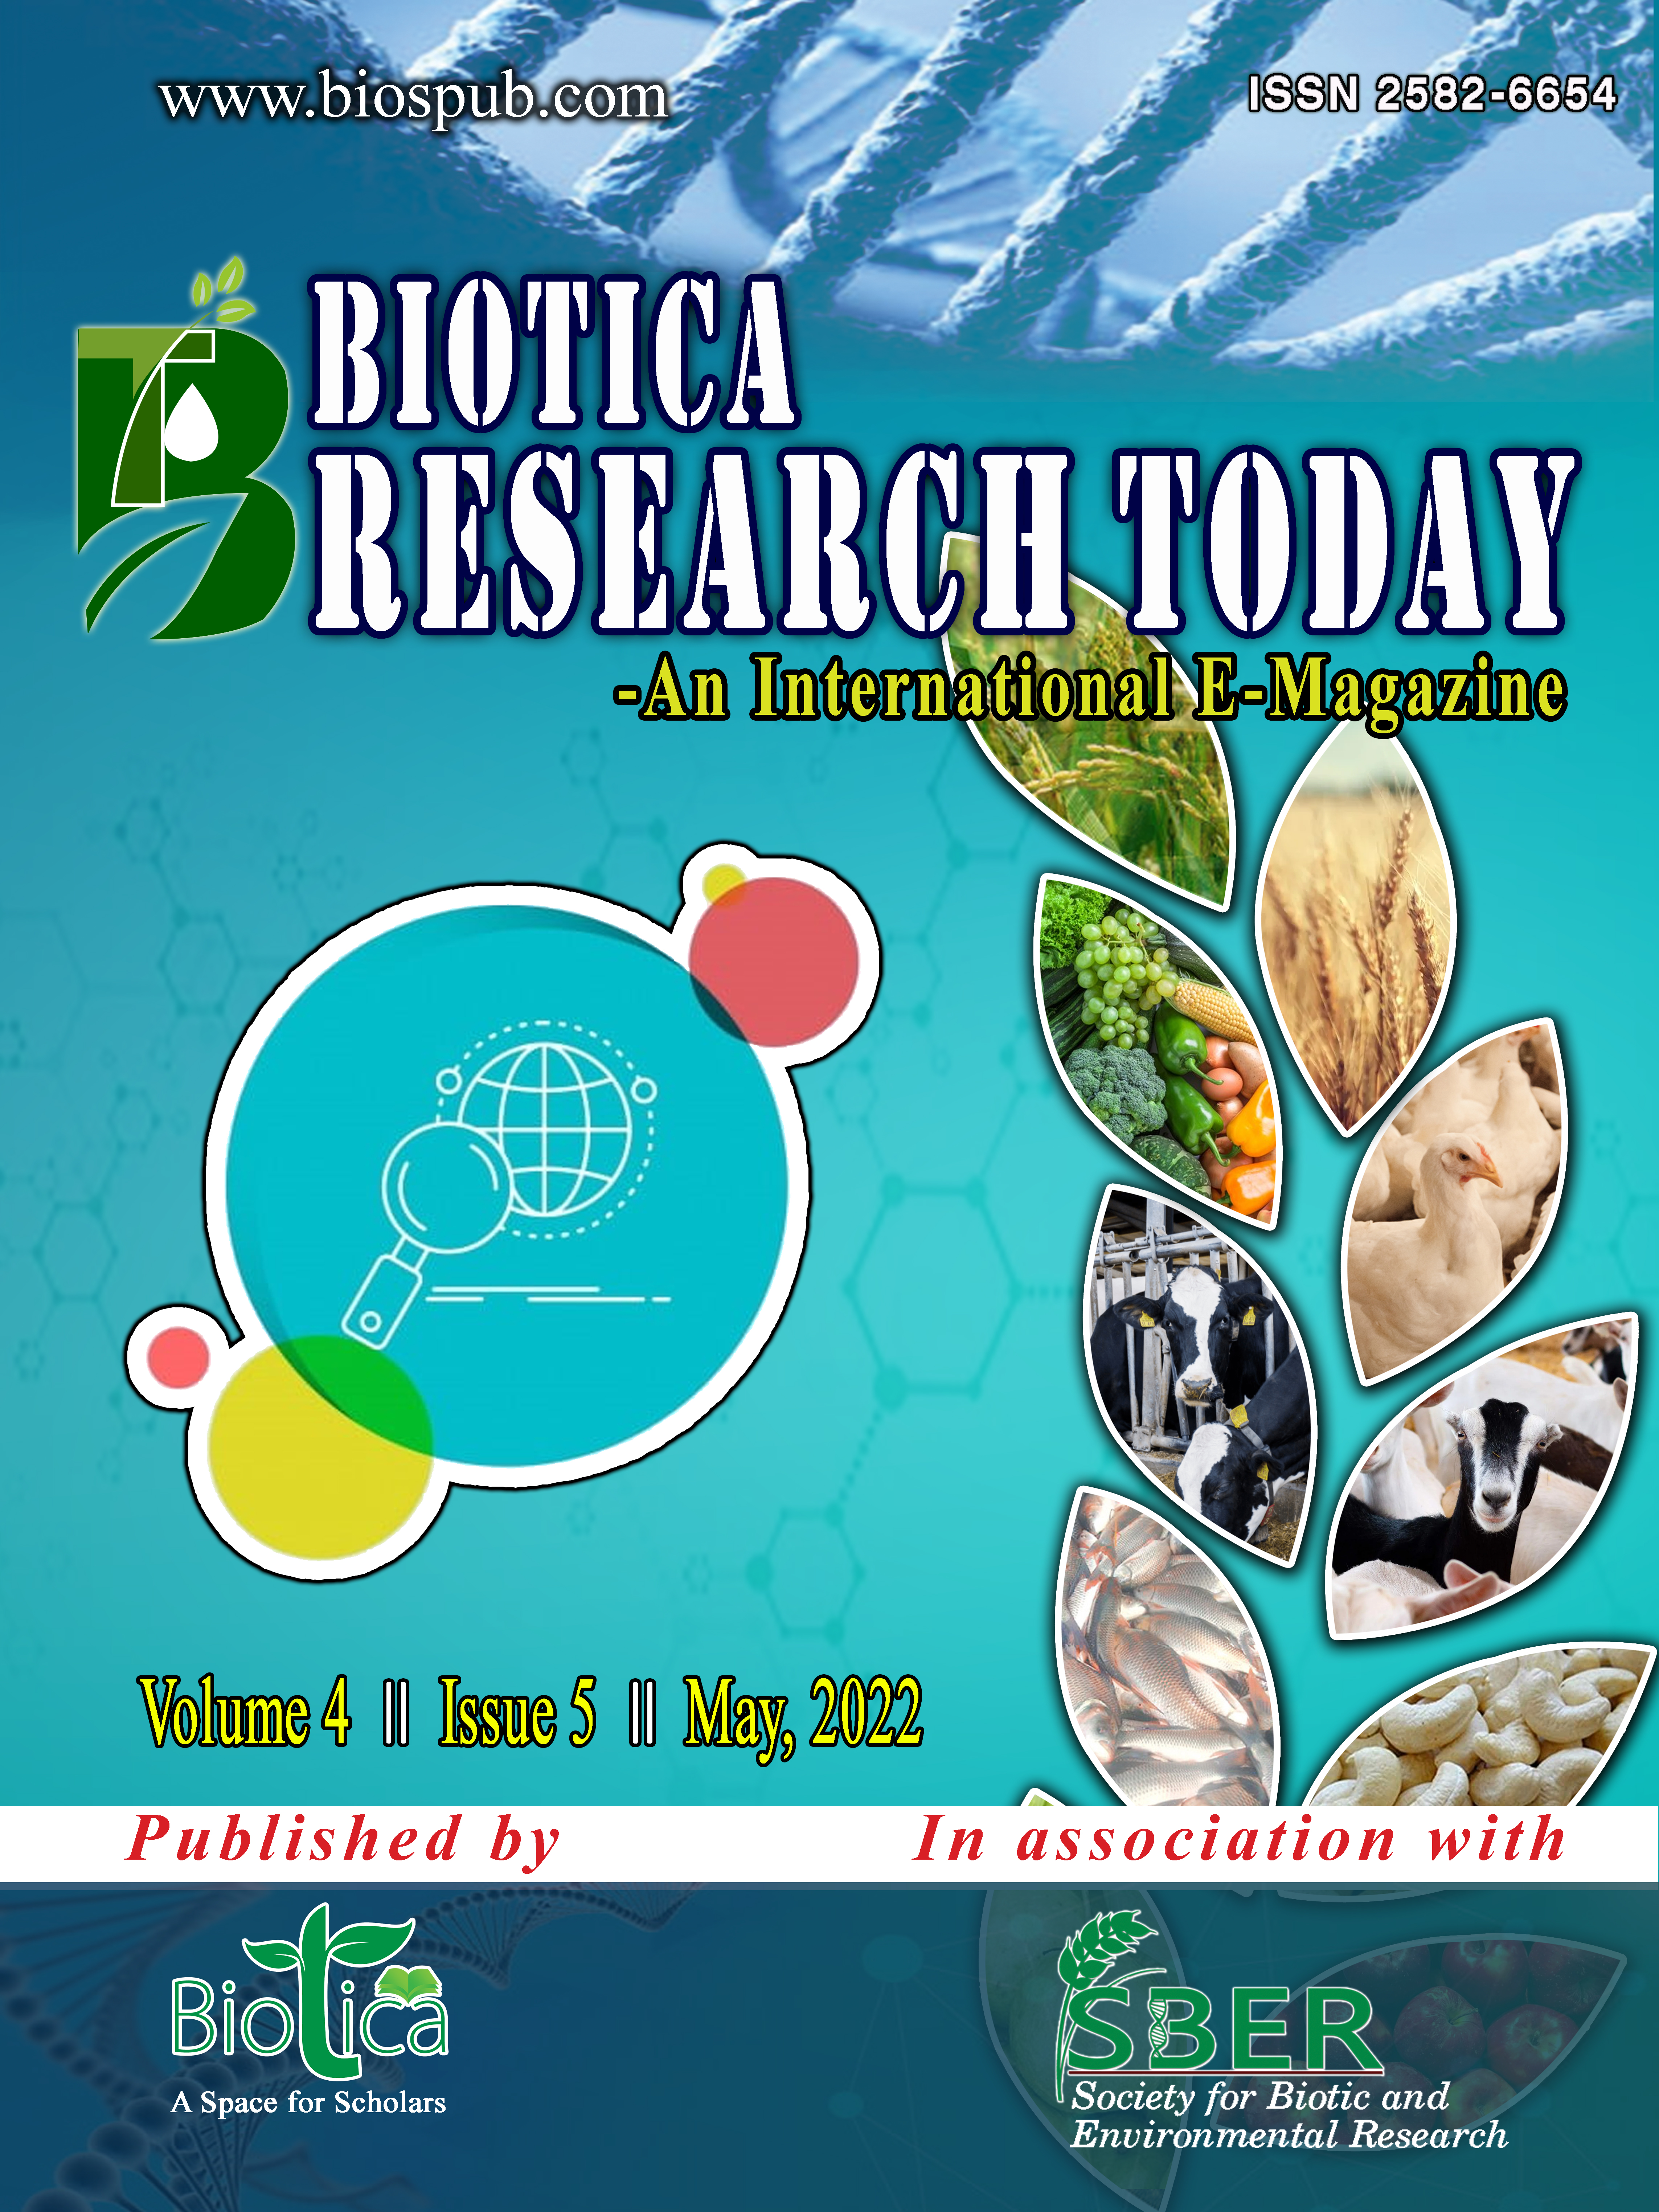 Biotica Research Today Vol 4 Issue 5 May 2022